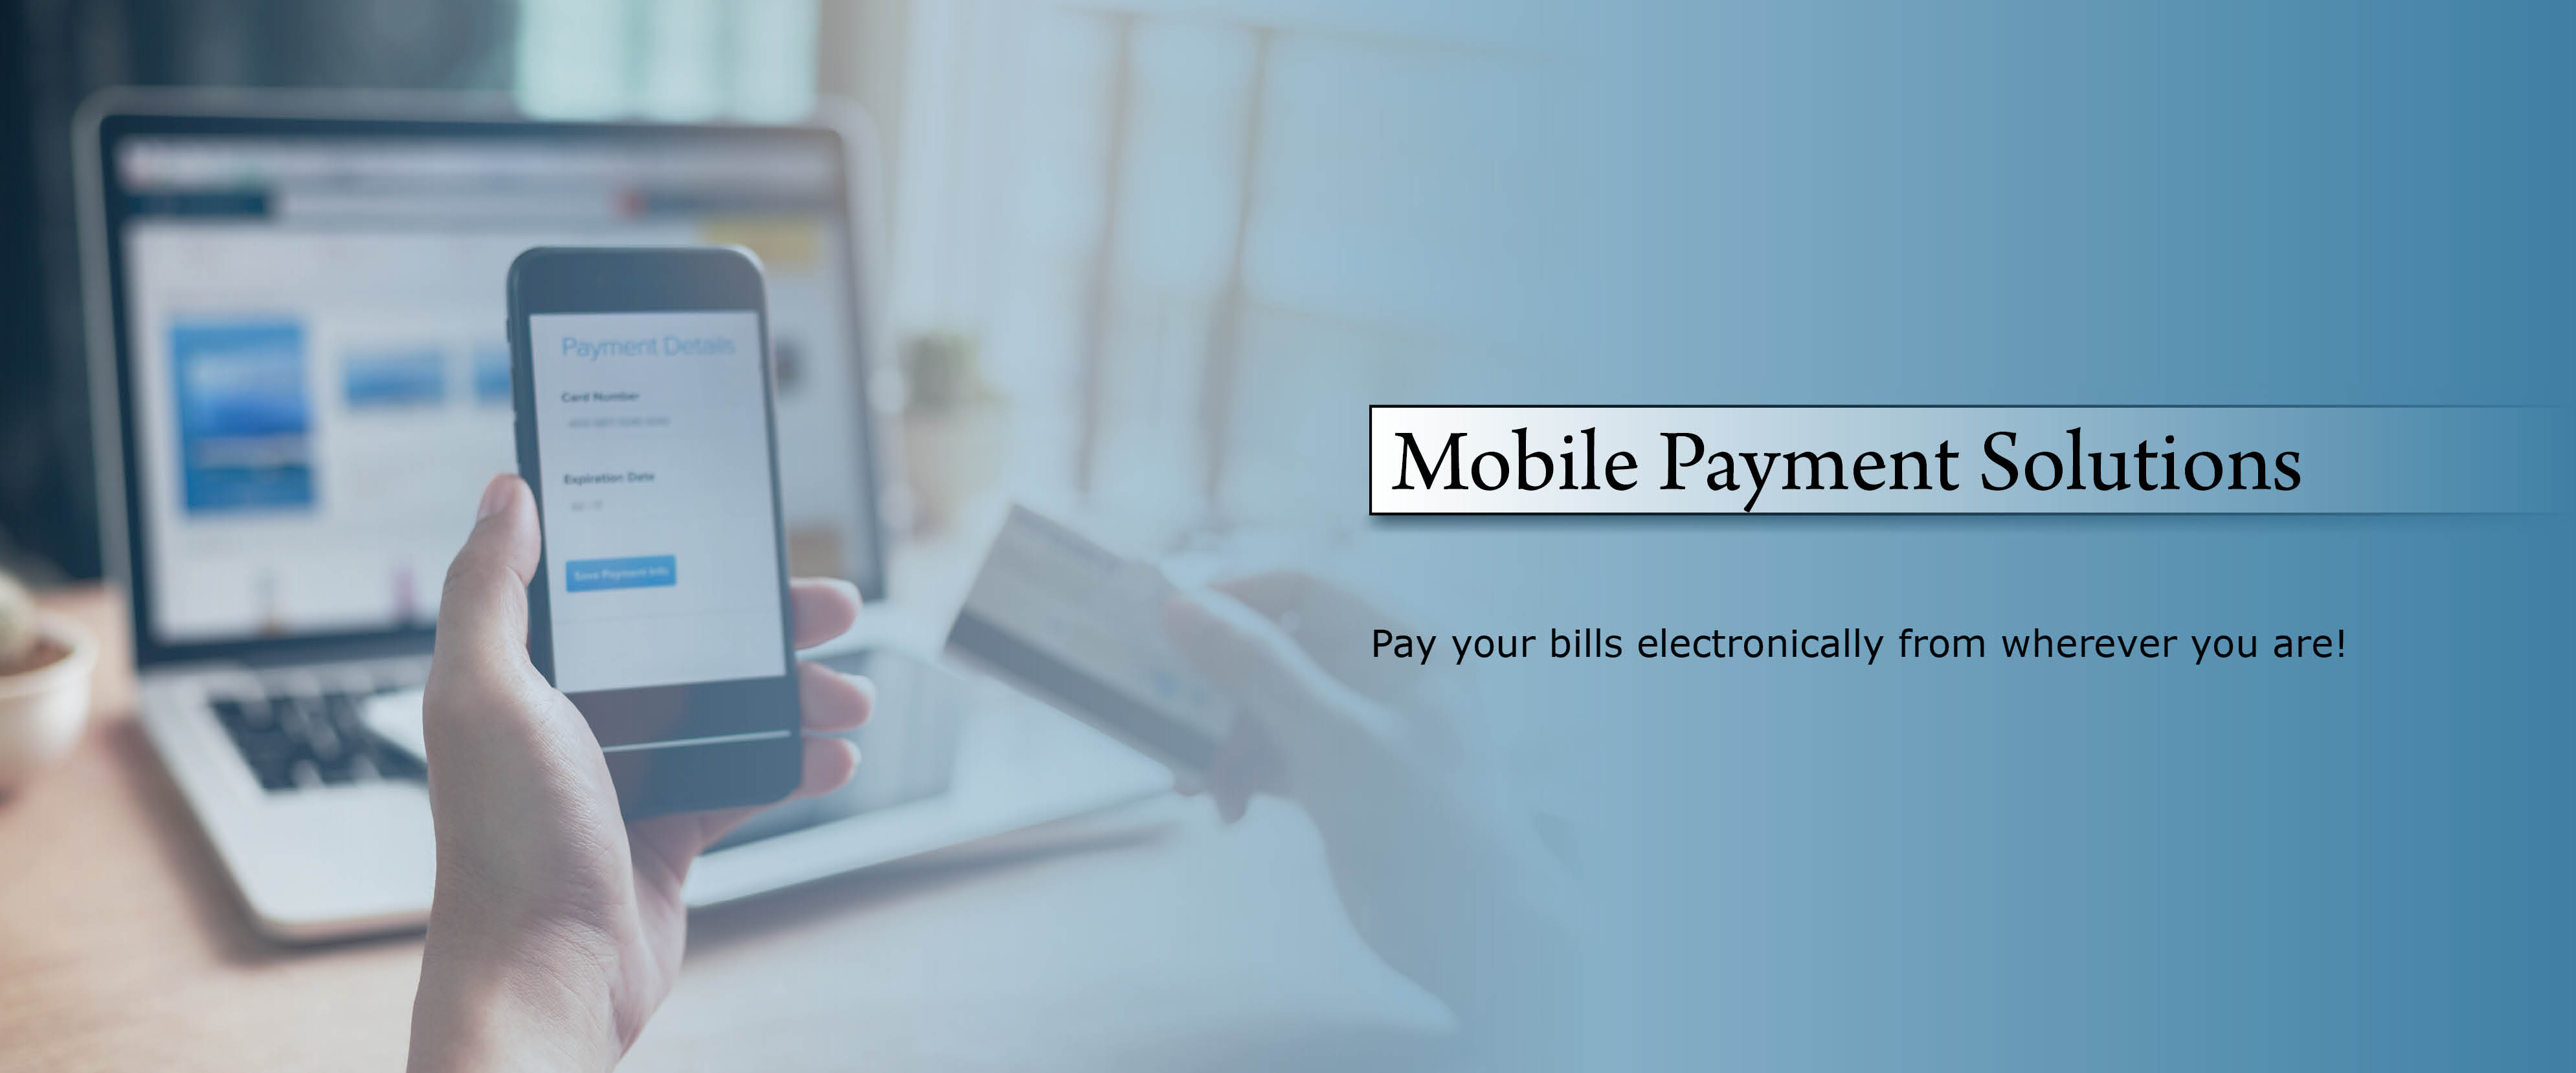 Mobile Payment Solutions